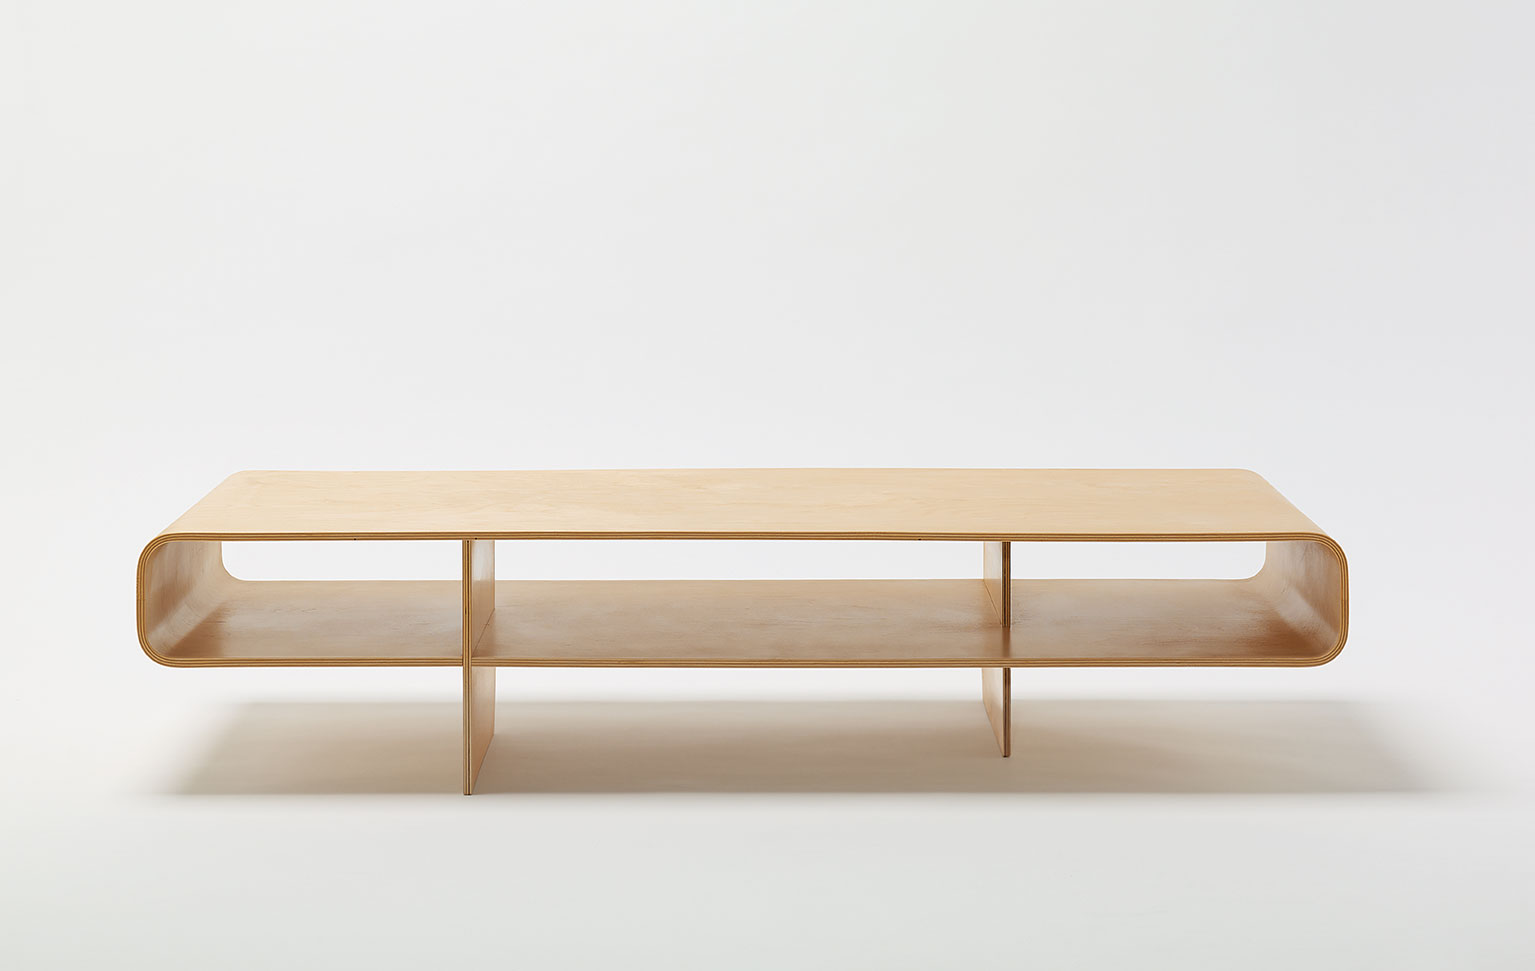 The Loop Table, 1996 by Barber and Osgerby for Isokon Plus